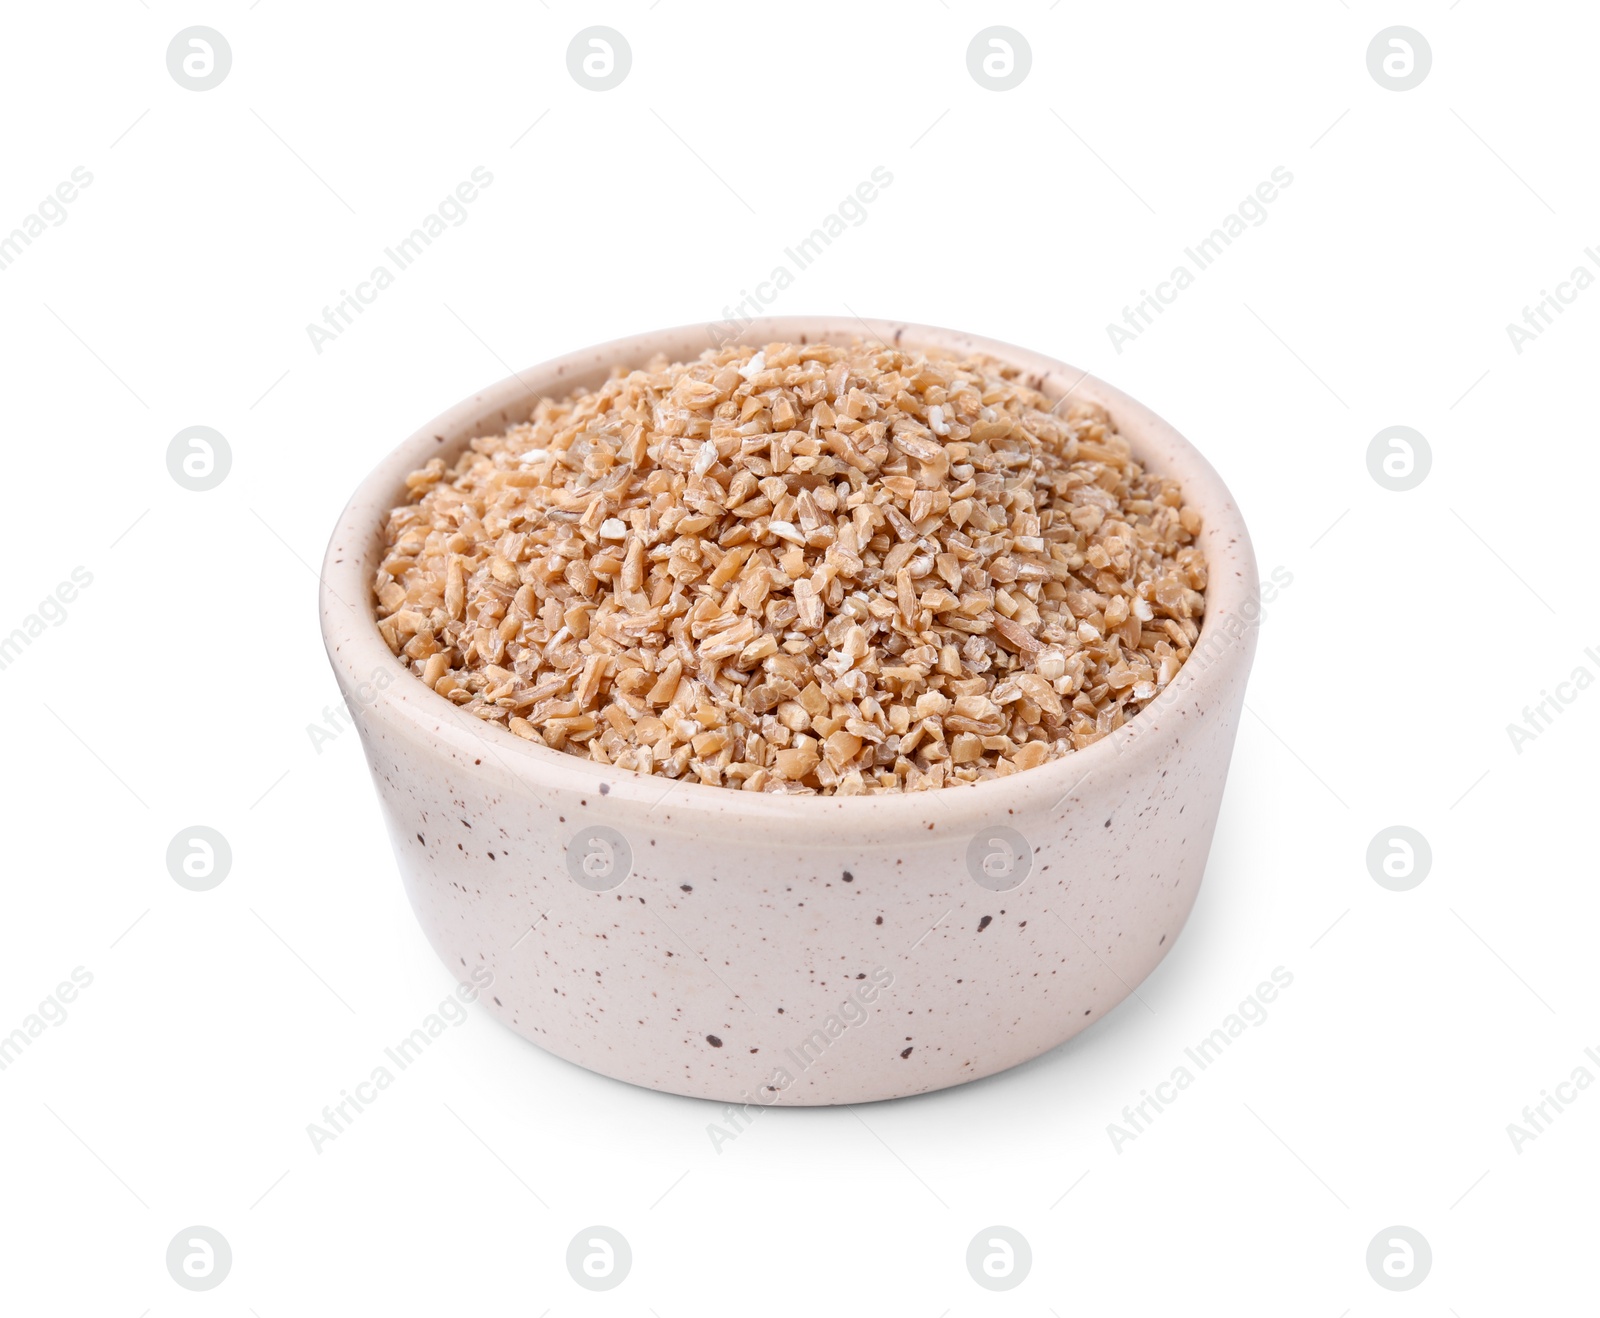 Photo of Dry wheat groats in bowl isolated on white